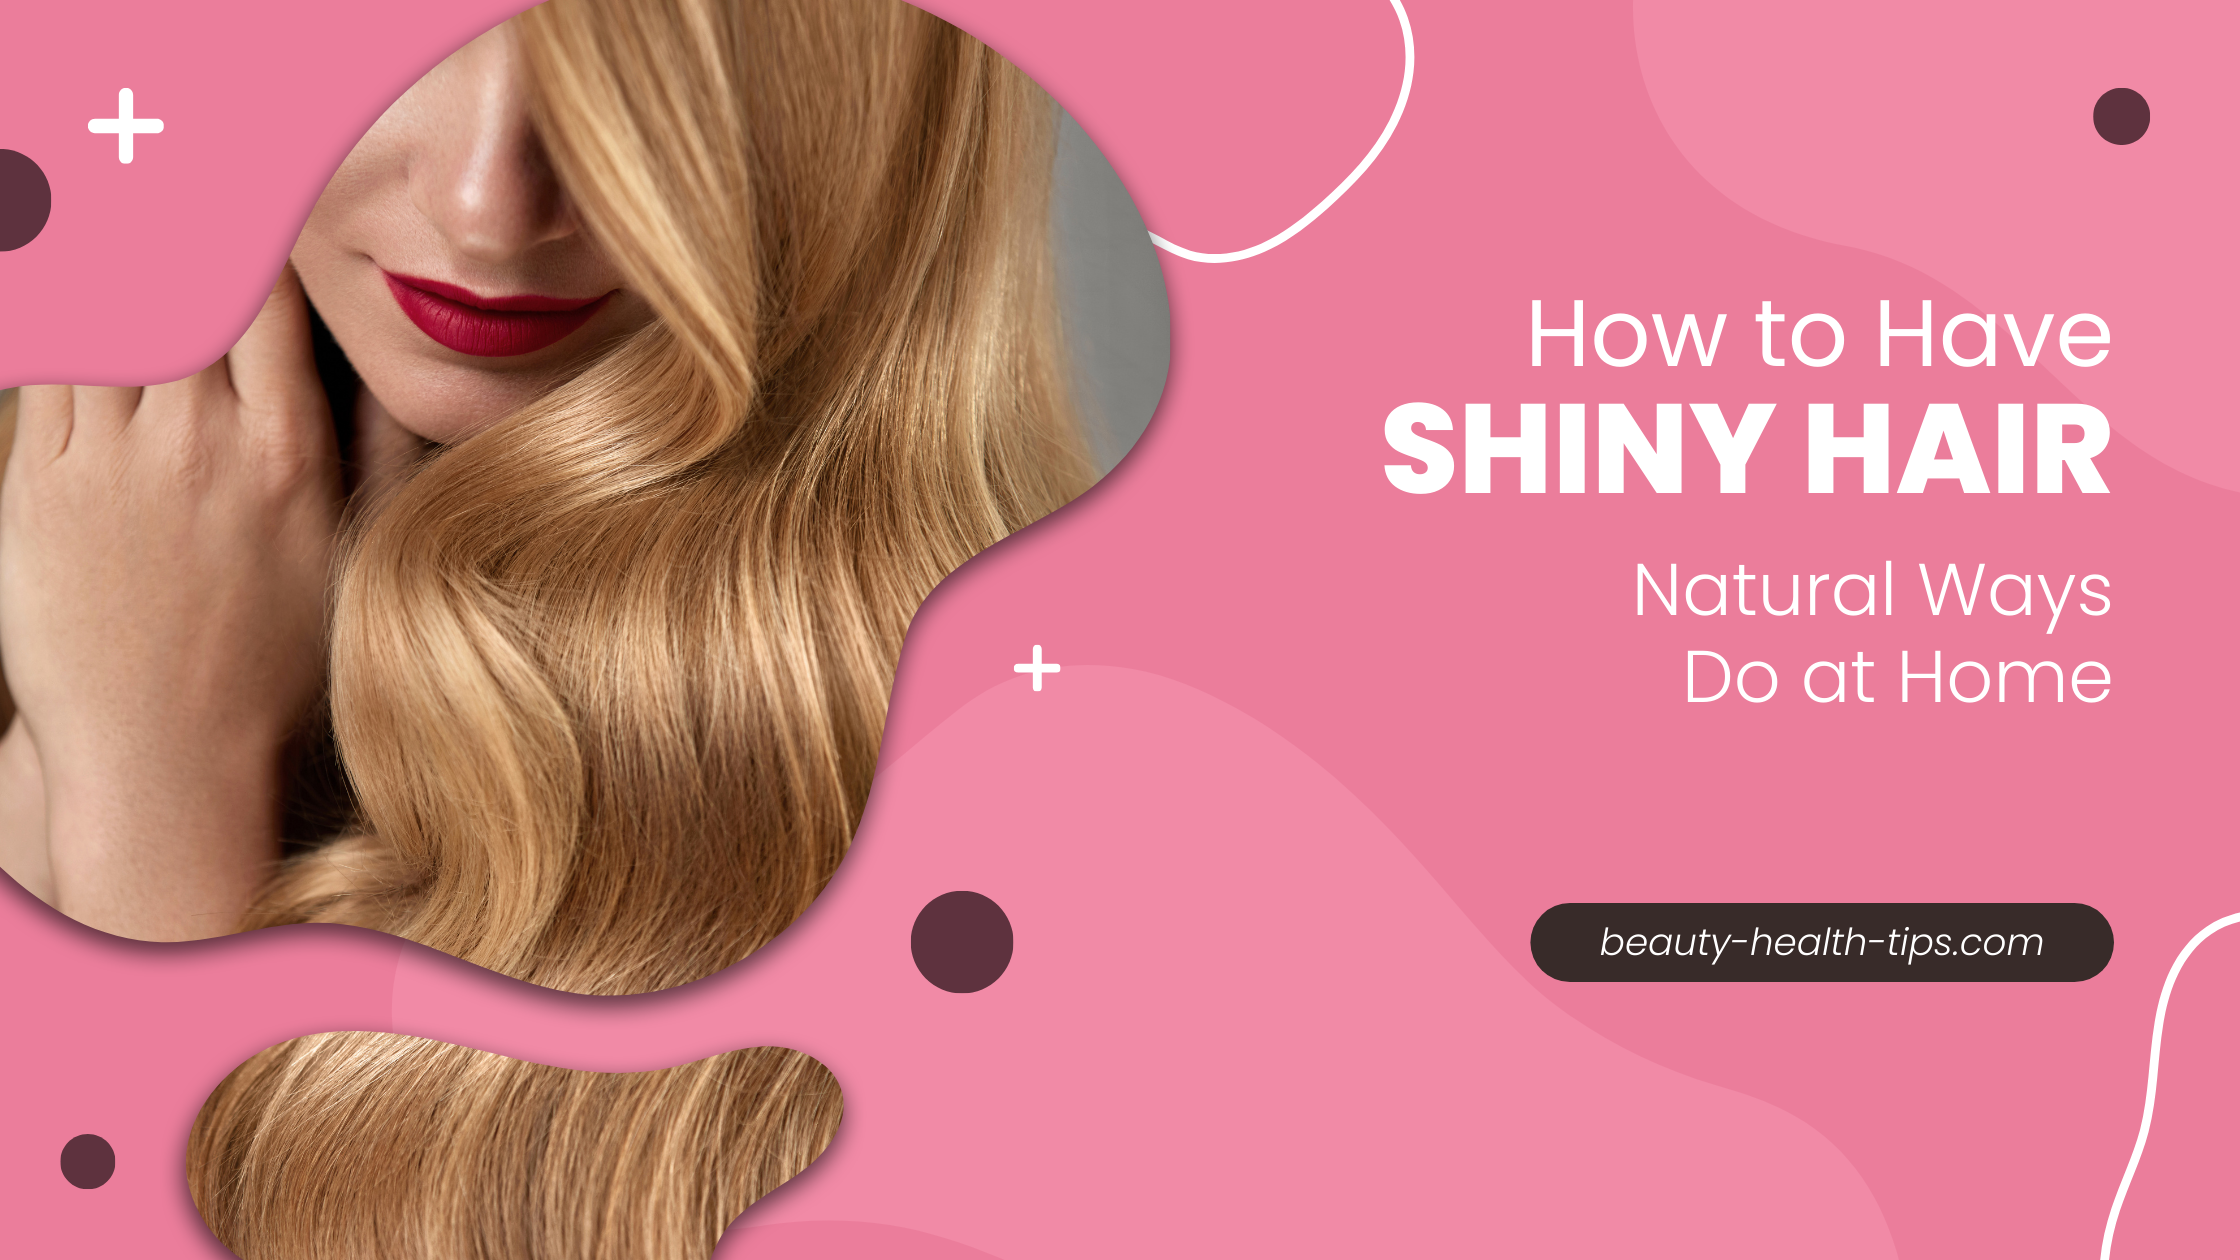 The Best Natural Ways to Have Shiny Hair